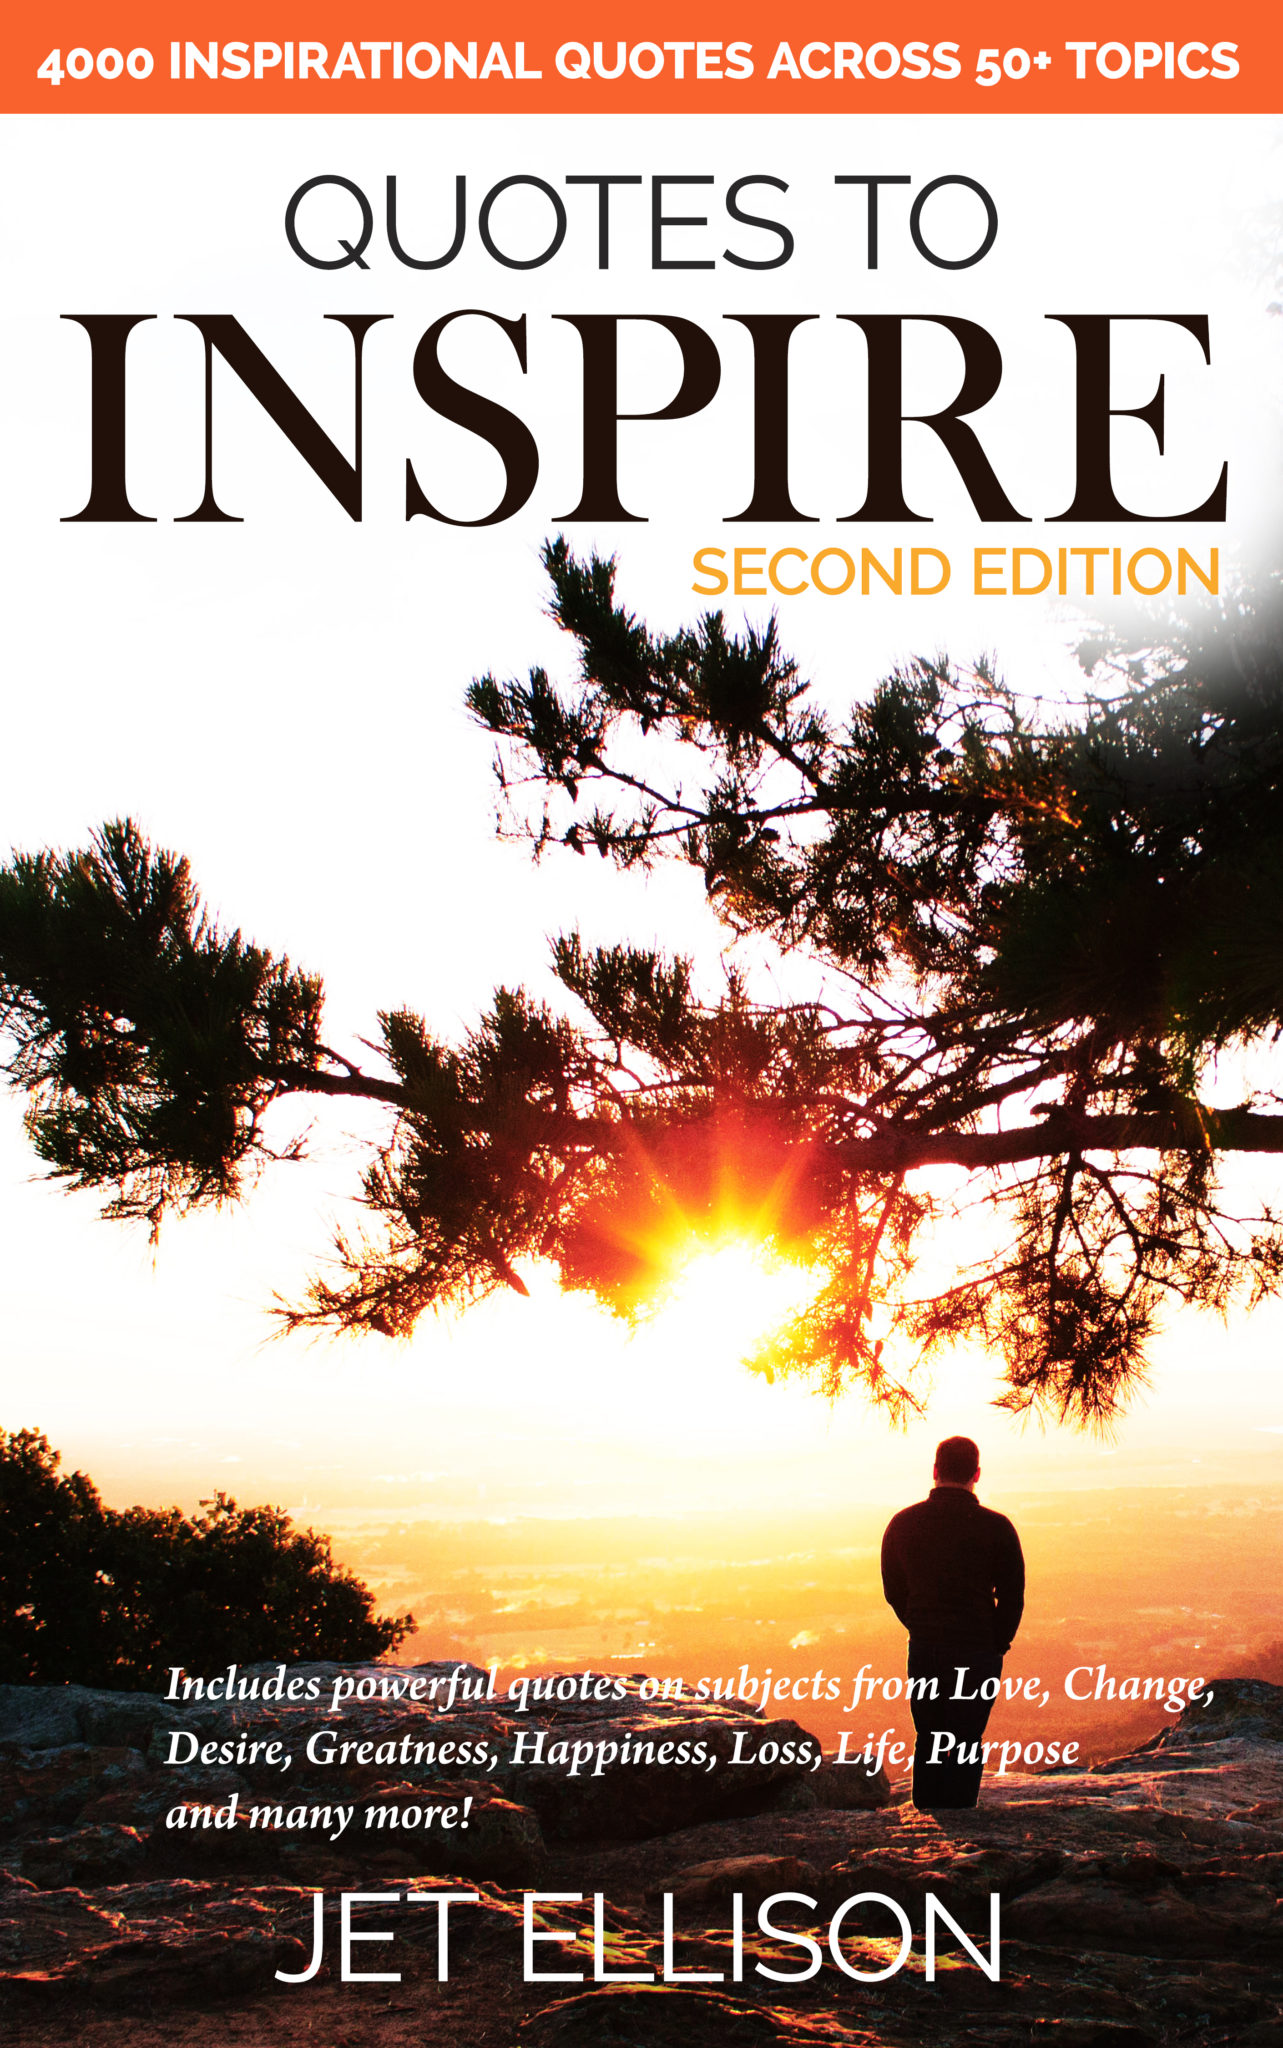 FREE: Quotes to Inspire (2nd Edition), 4000+ Quotes in 50+ Categories by Jet Ellison